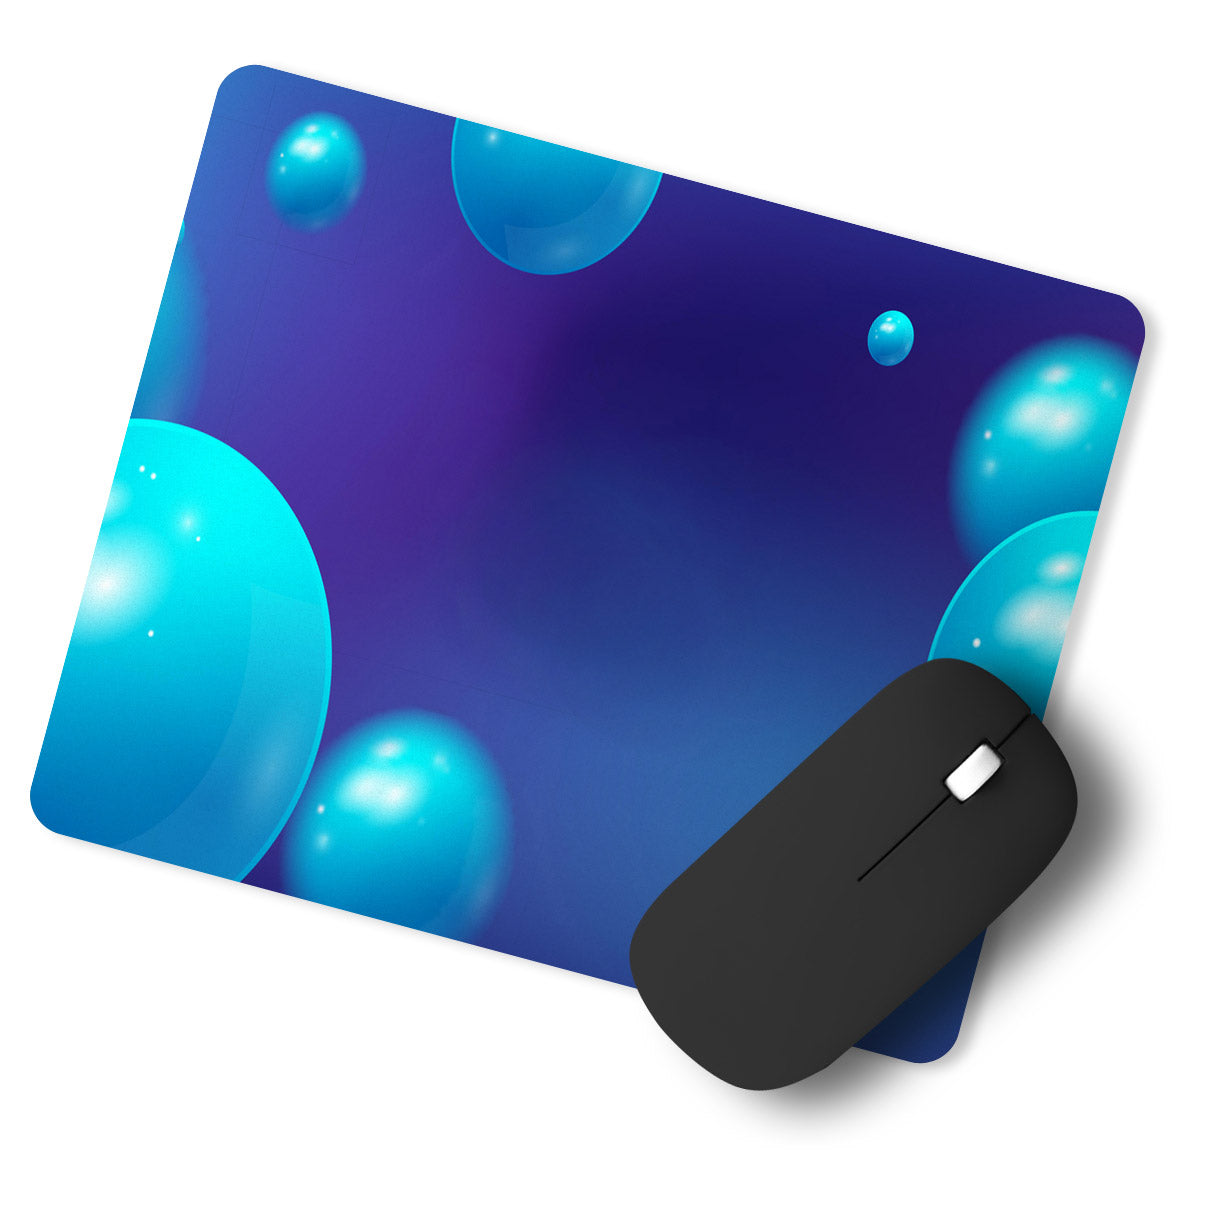 Blue Bubble Background Designer Printed Premium Mouse pad (9 in x 7.5 in)